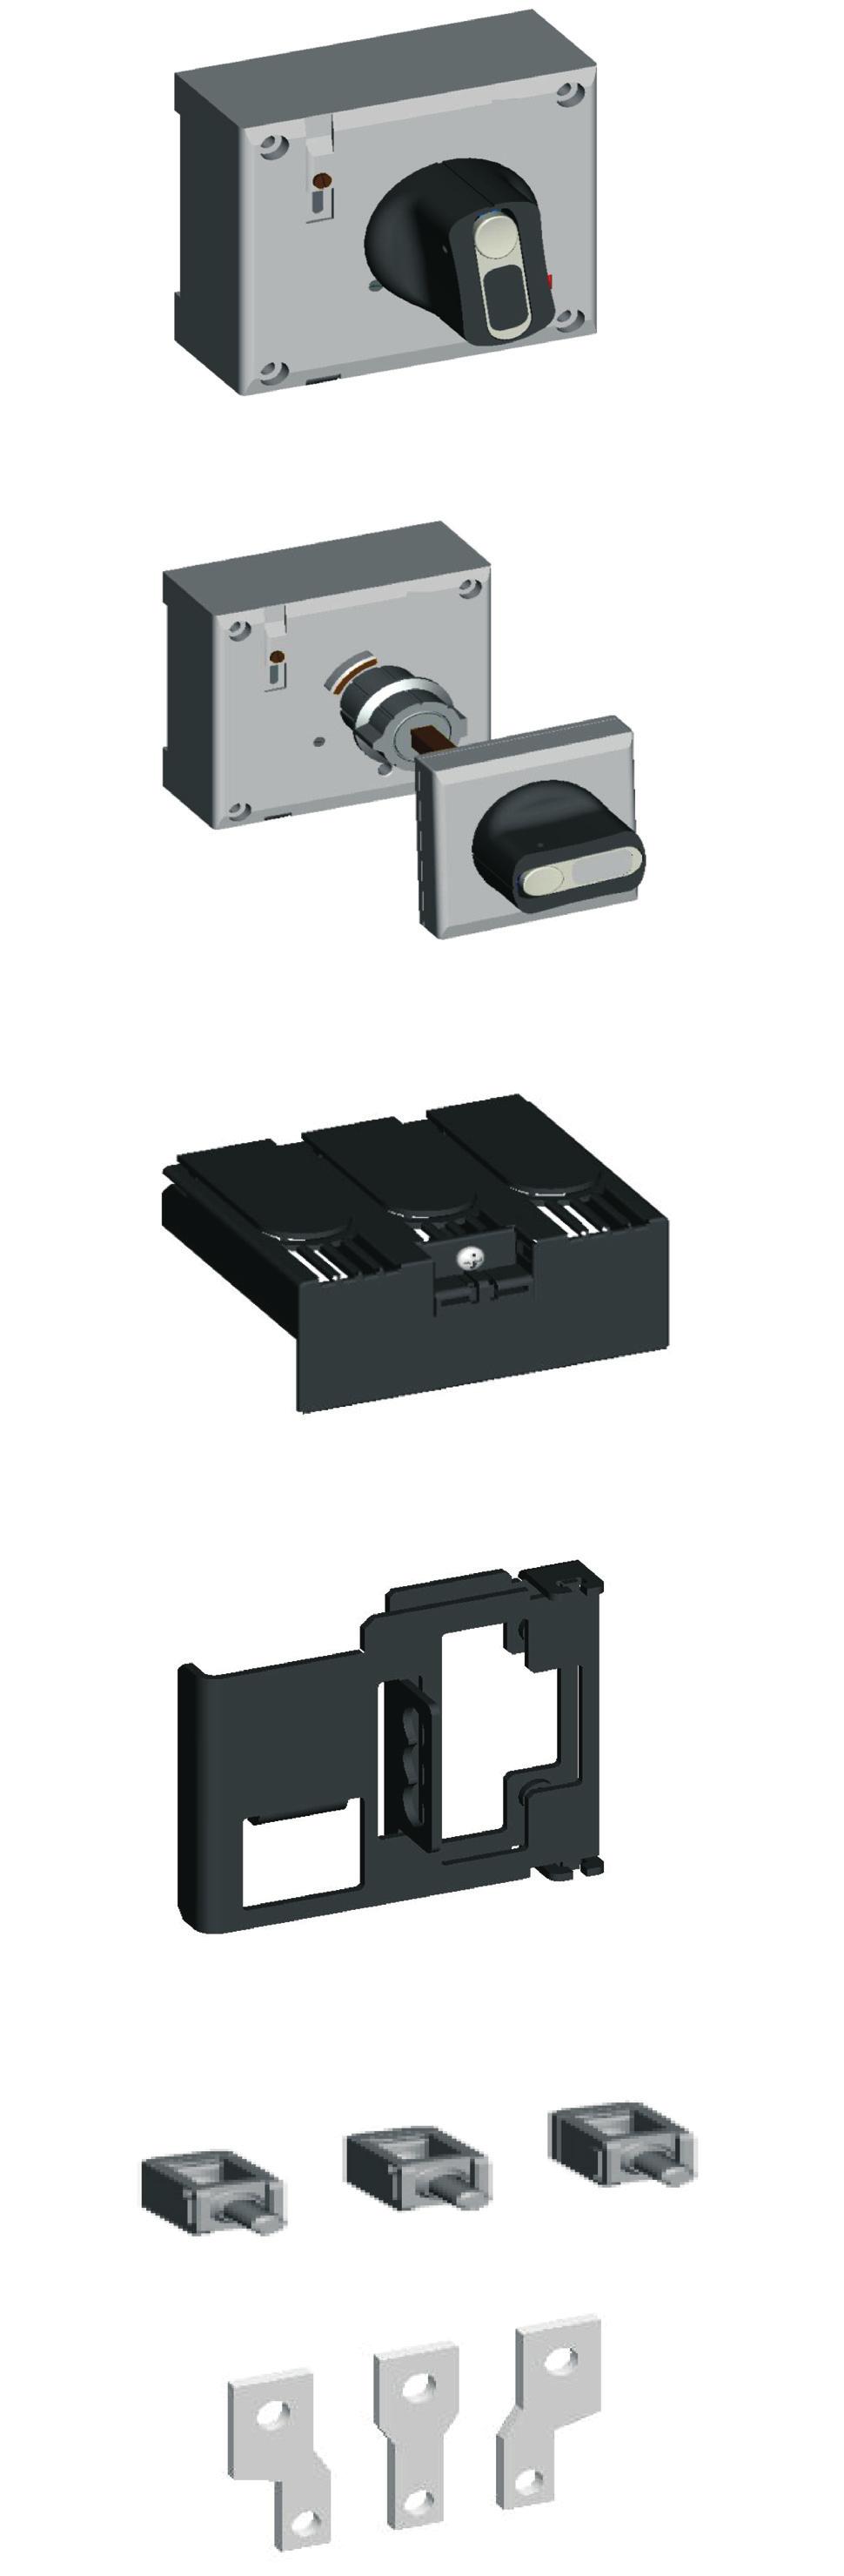 Rotary Handles Rotary handles are mounted directly onto the breaker front facia and allow the user to modify the standard top to bottom toggle operation mode to a rotary operation.